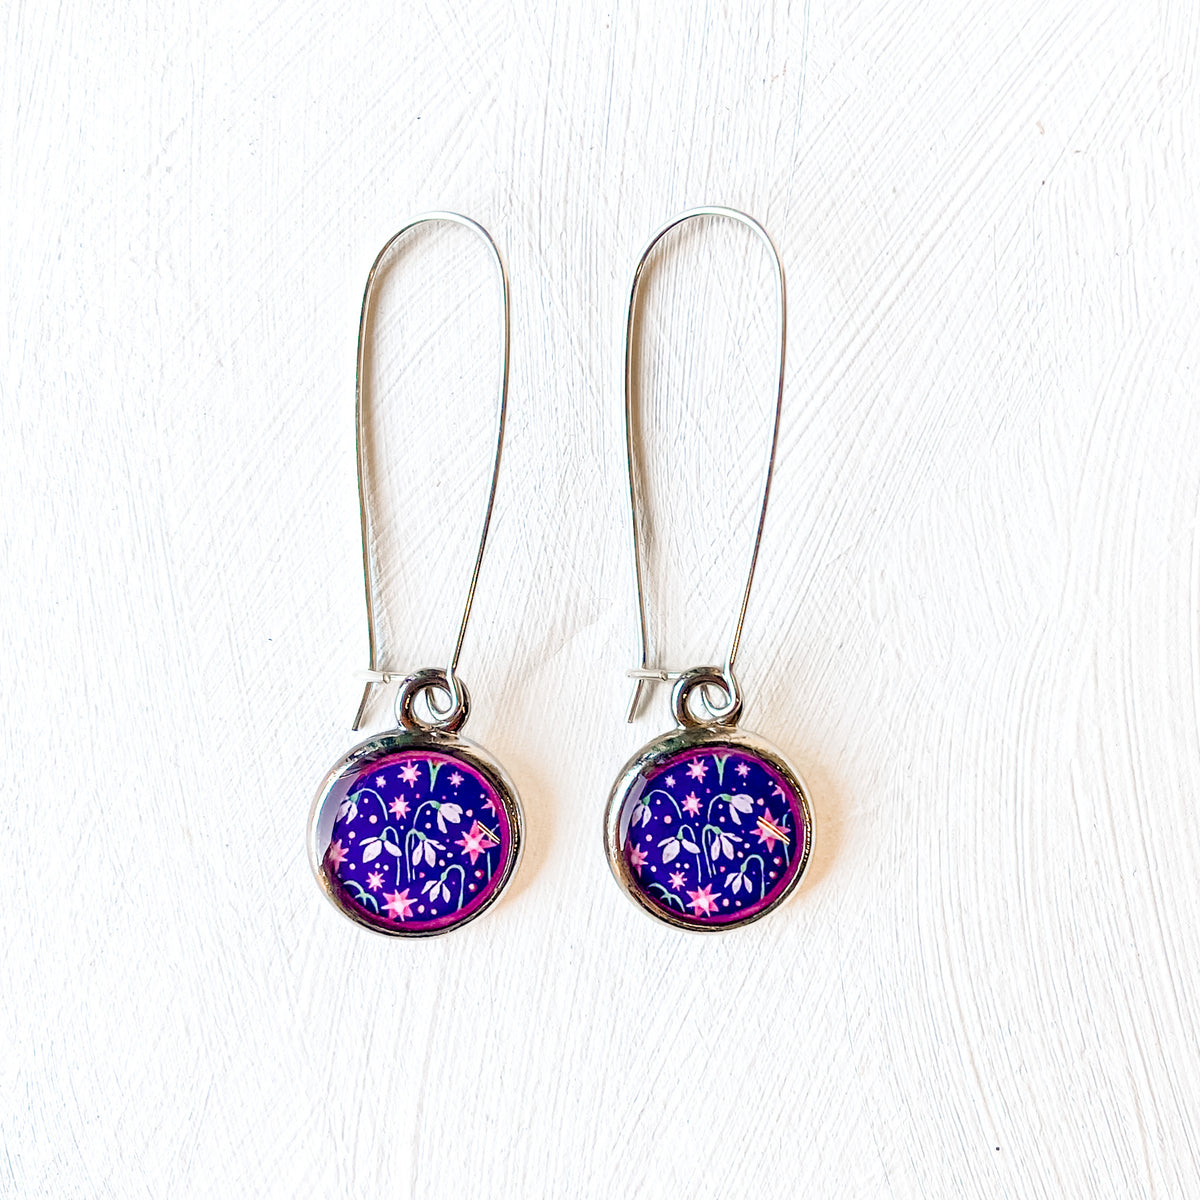 a pair of earrings with a purple and blue design